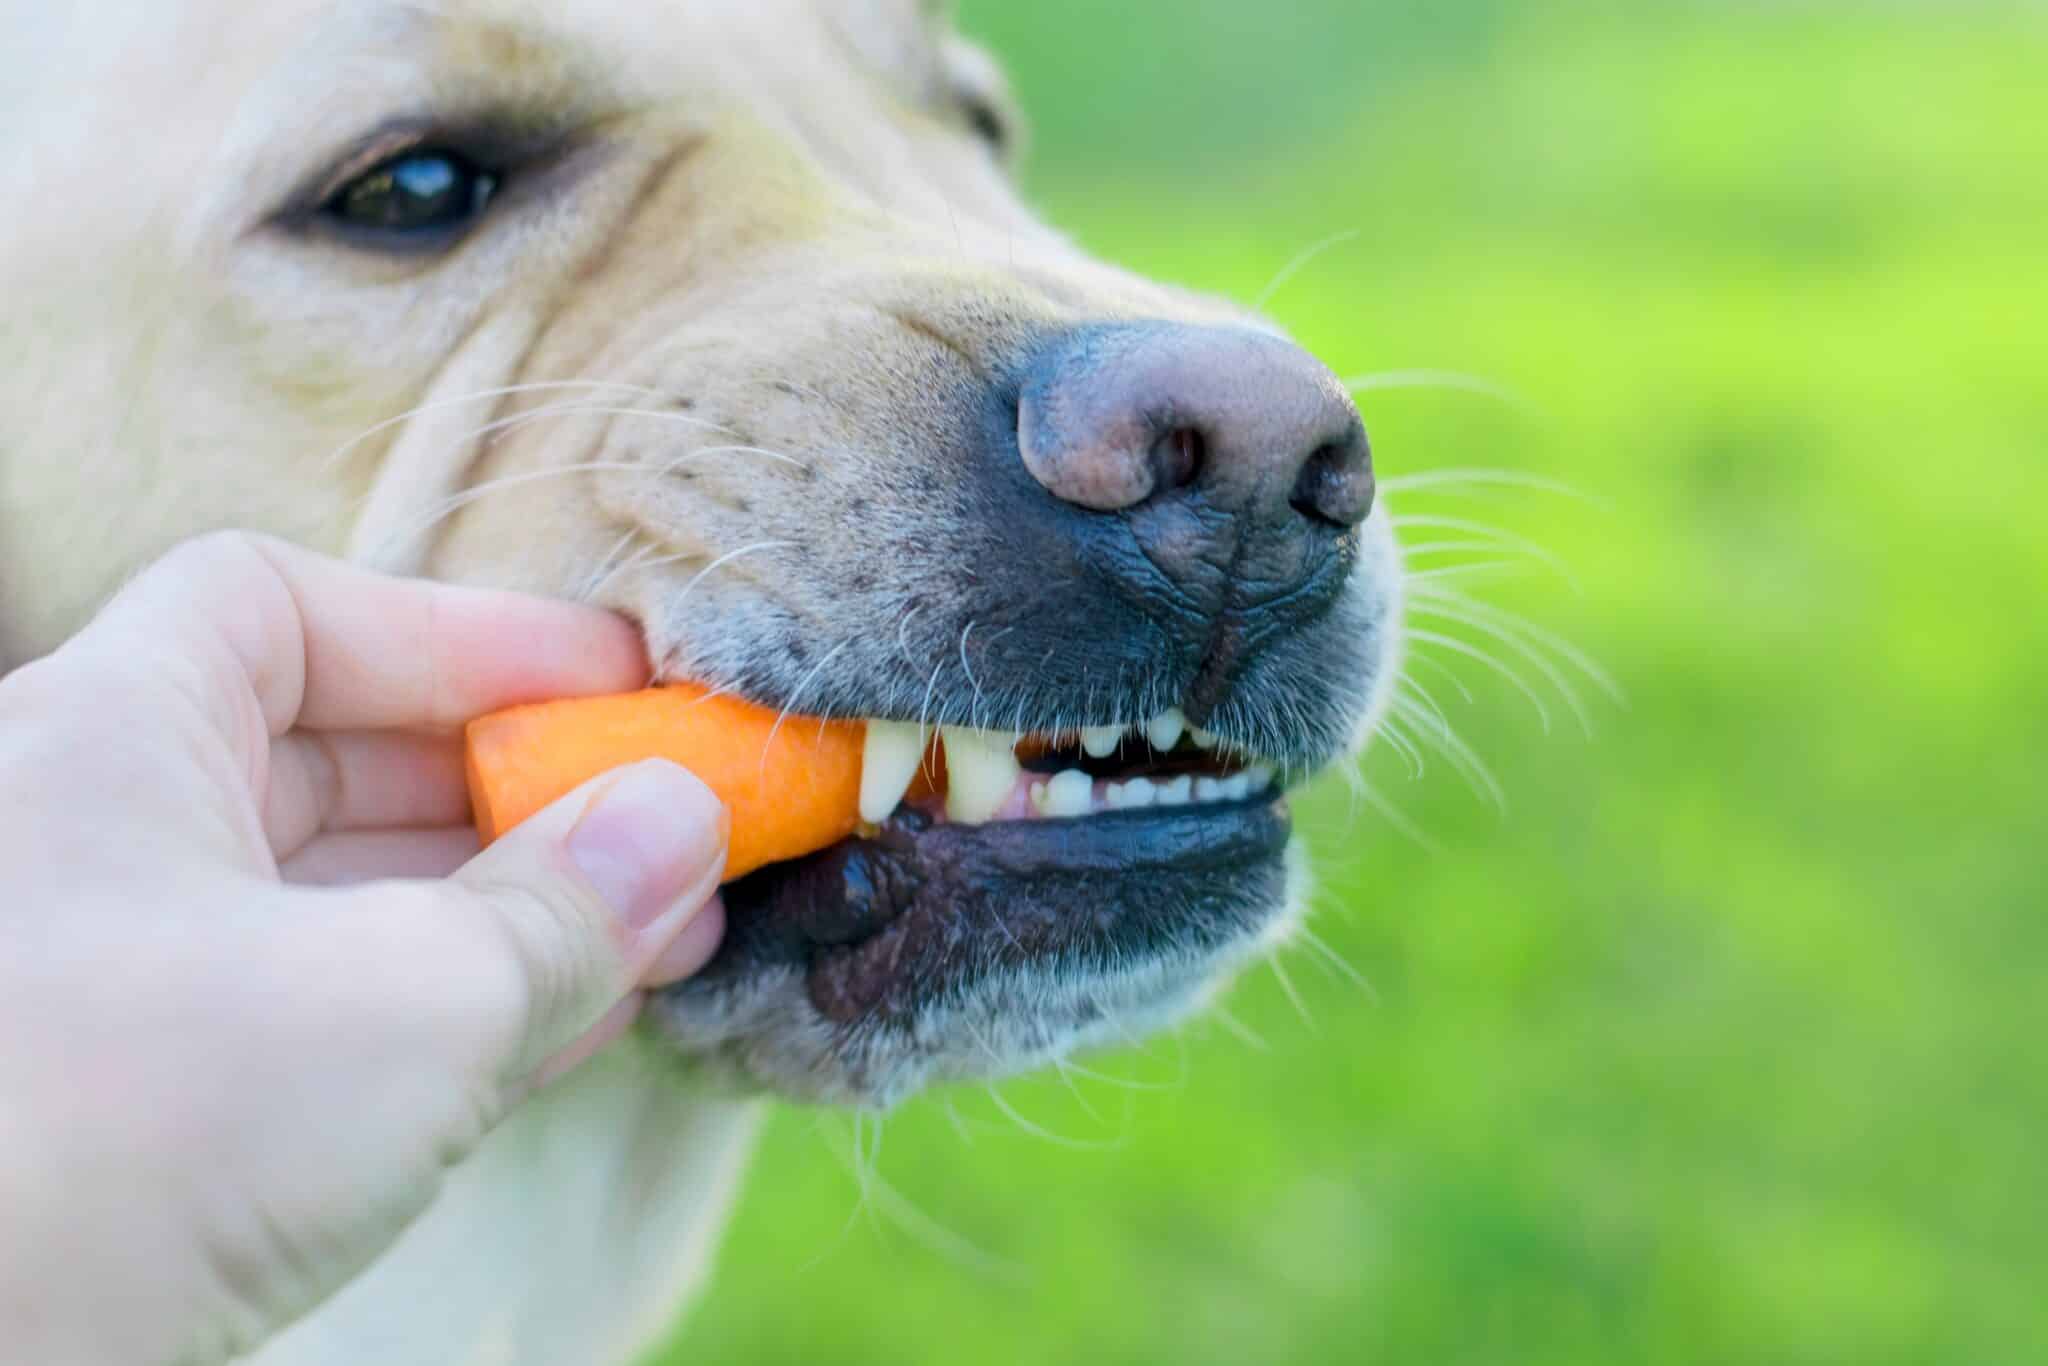 Affordable Dog Teeth Cleaning: Natural Alternatives Vs. Veterinary Cleanings